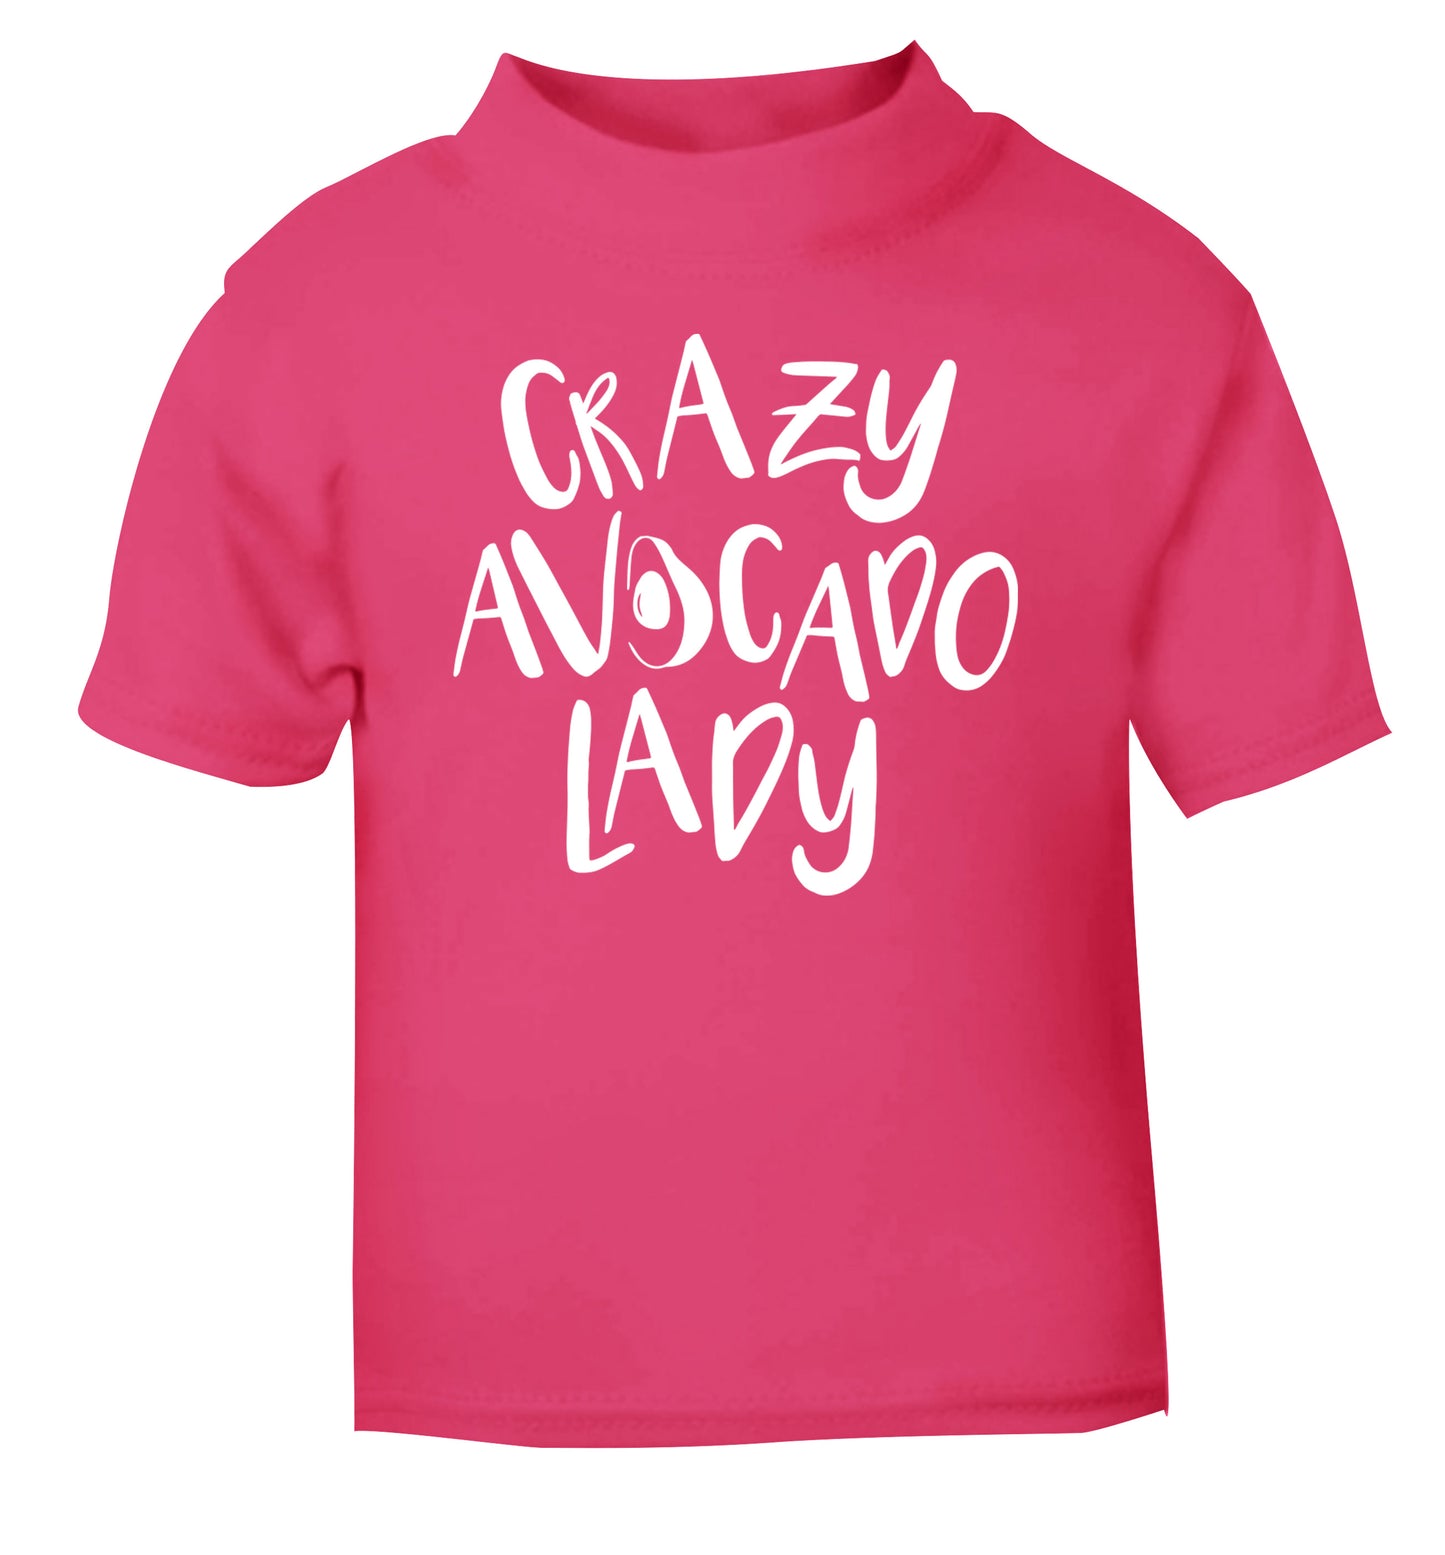 Crazy avocado lady pink Baby Toddler Tshirt 2 Years